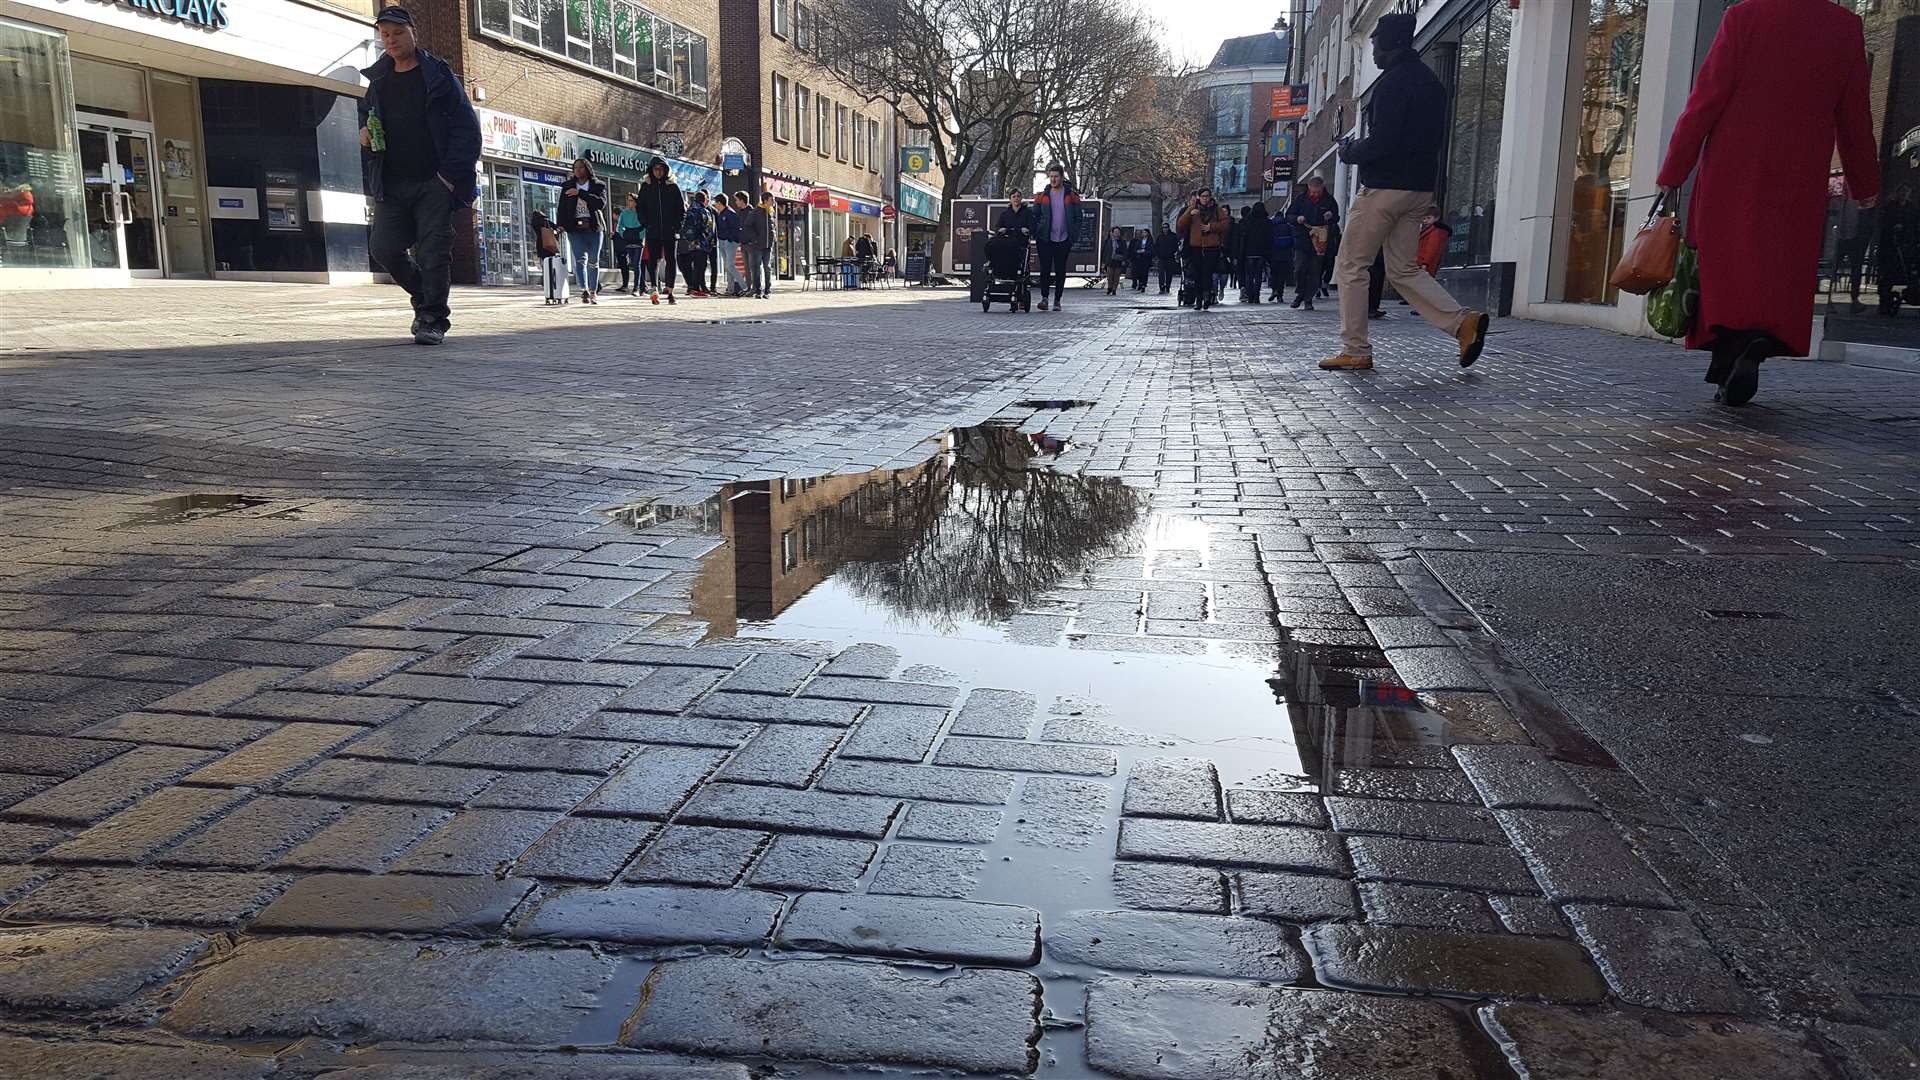 The poor surface in St George's Street urgently needs re-paving